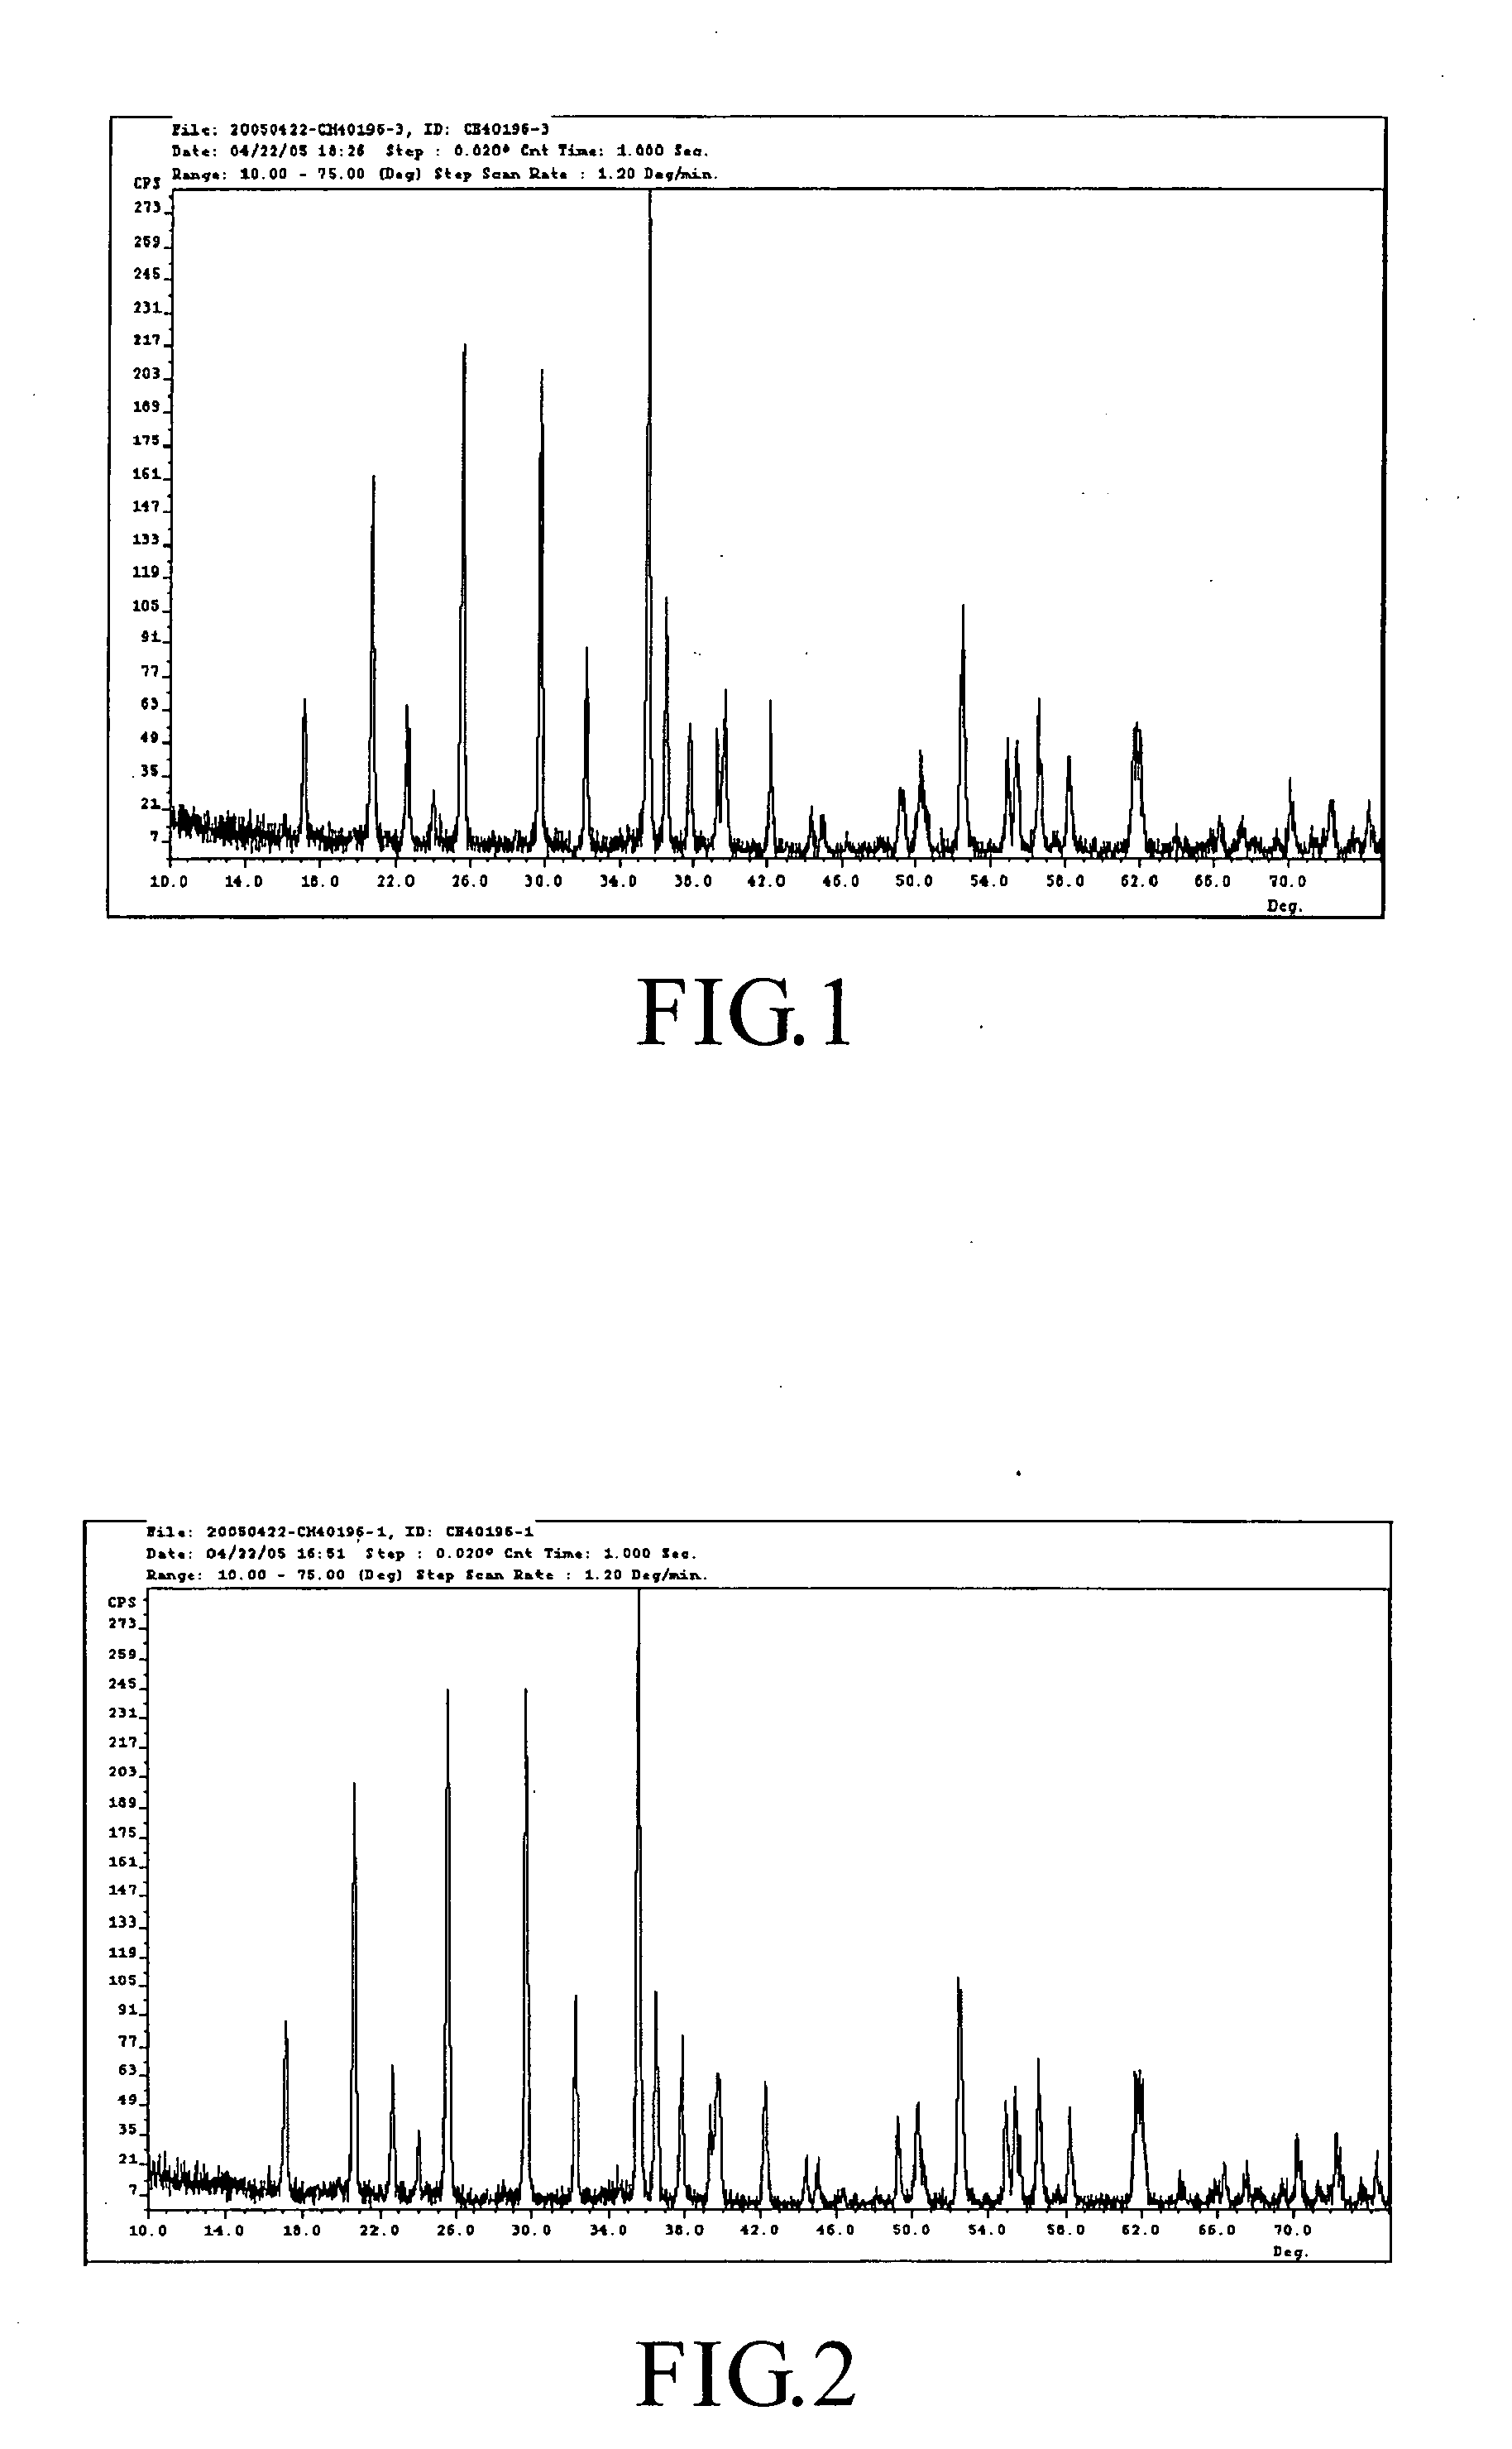 Method for making a lithium mixed metal compound having an olivine structure